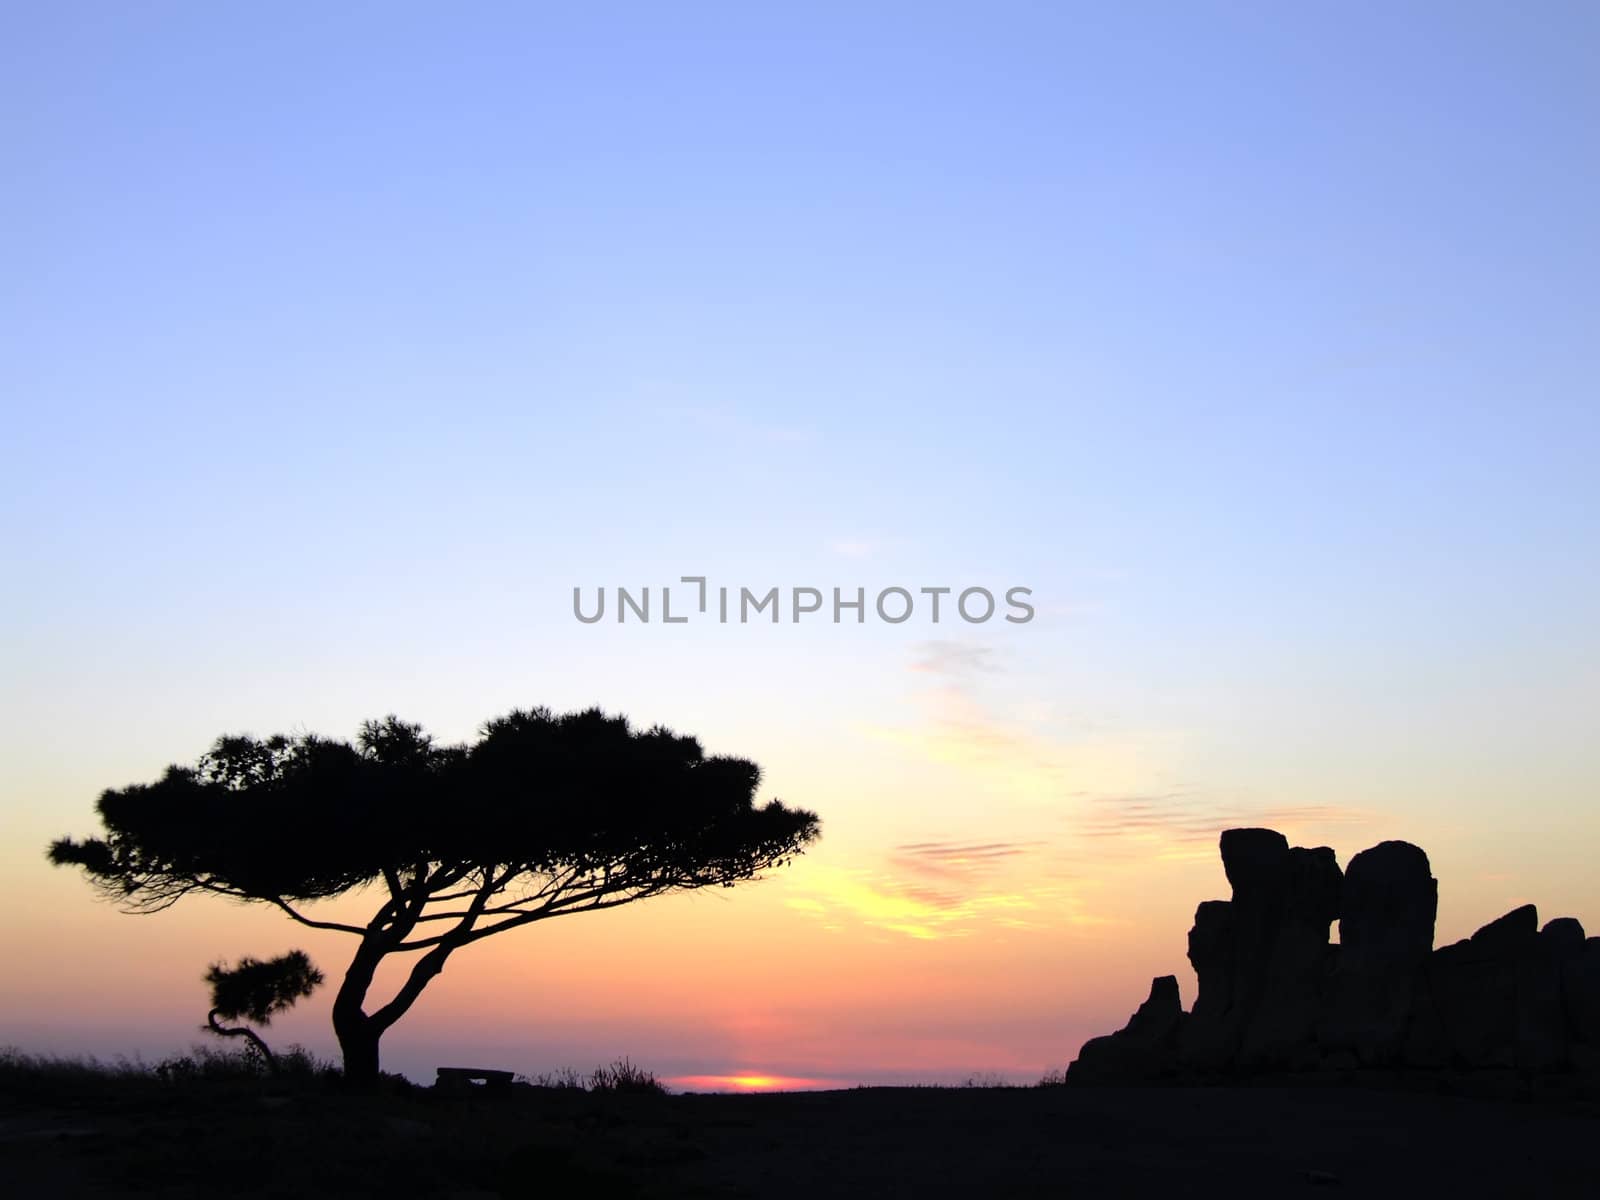 The oldest free-standing building/temple in the world. Oldest neolithic prehistoric temple built thousands of years before the pyramids. - Hagar Qim & Mnajdra Temples in Malta, Mediterranean Sea, Europe - here seen silhouetted at sunset